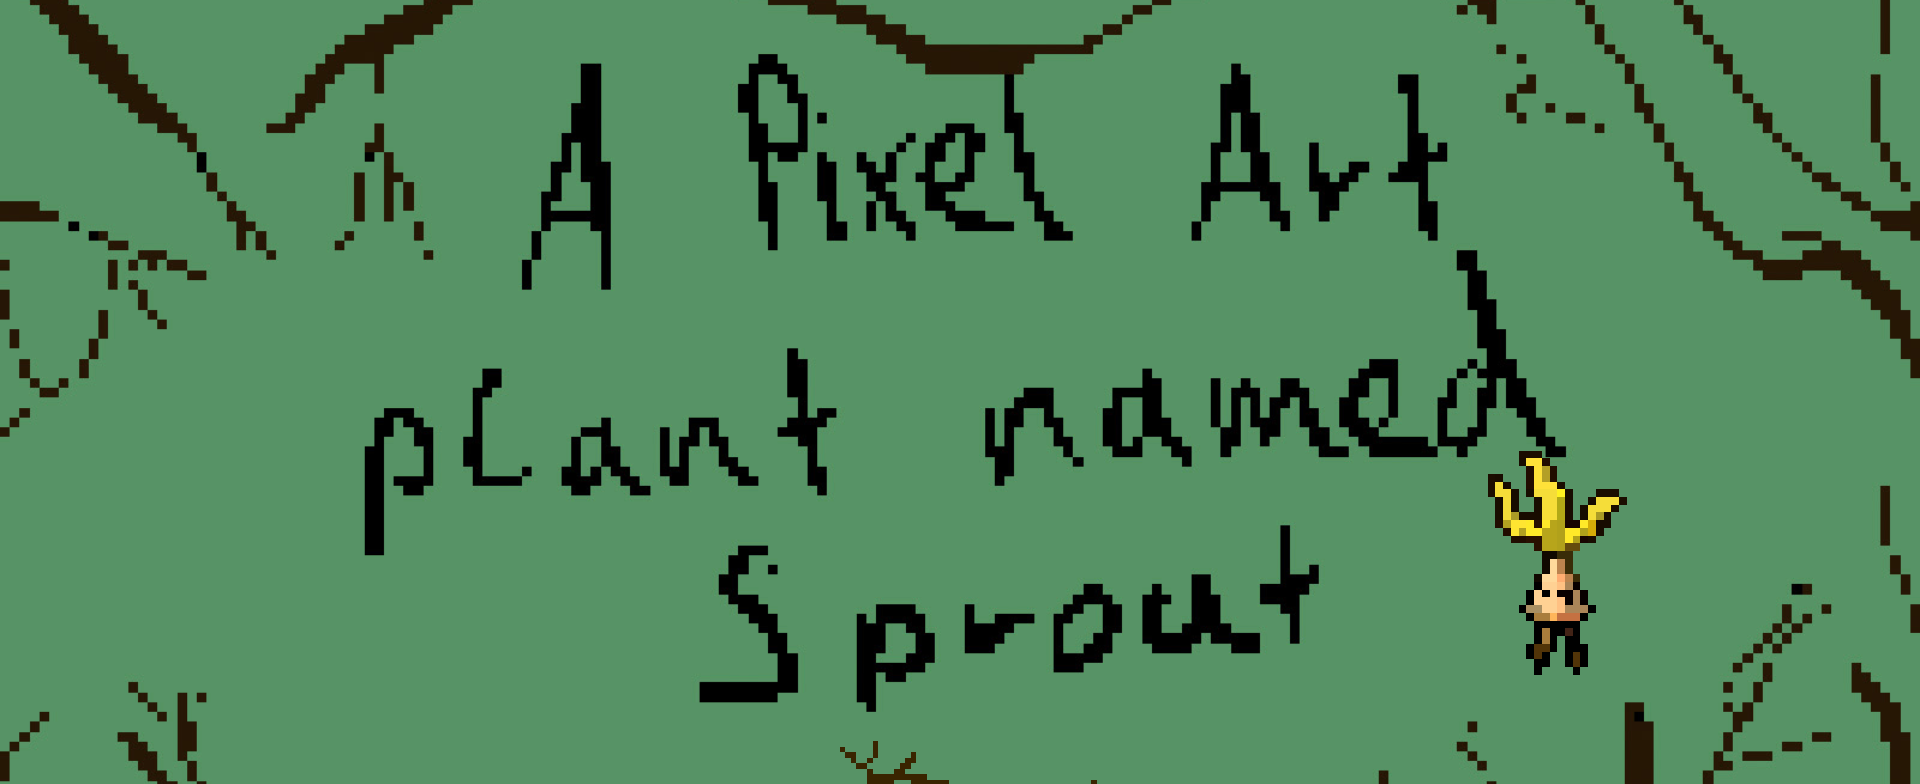 A Pixel Art plant named Sprout